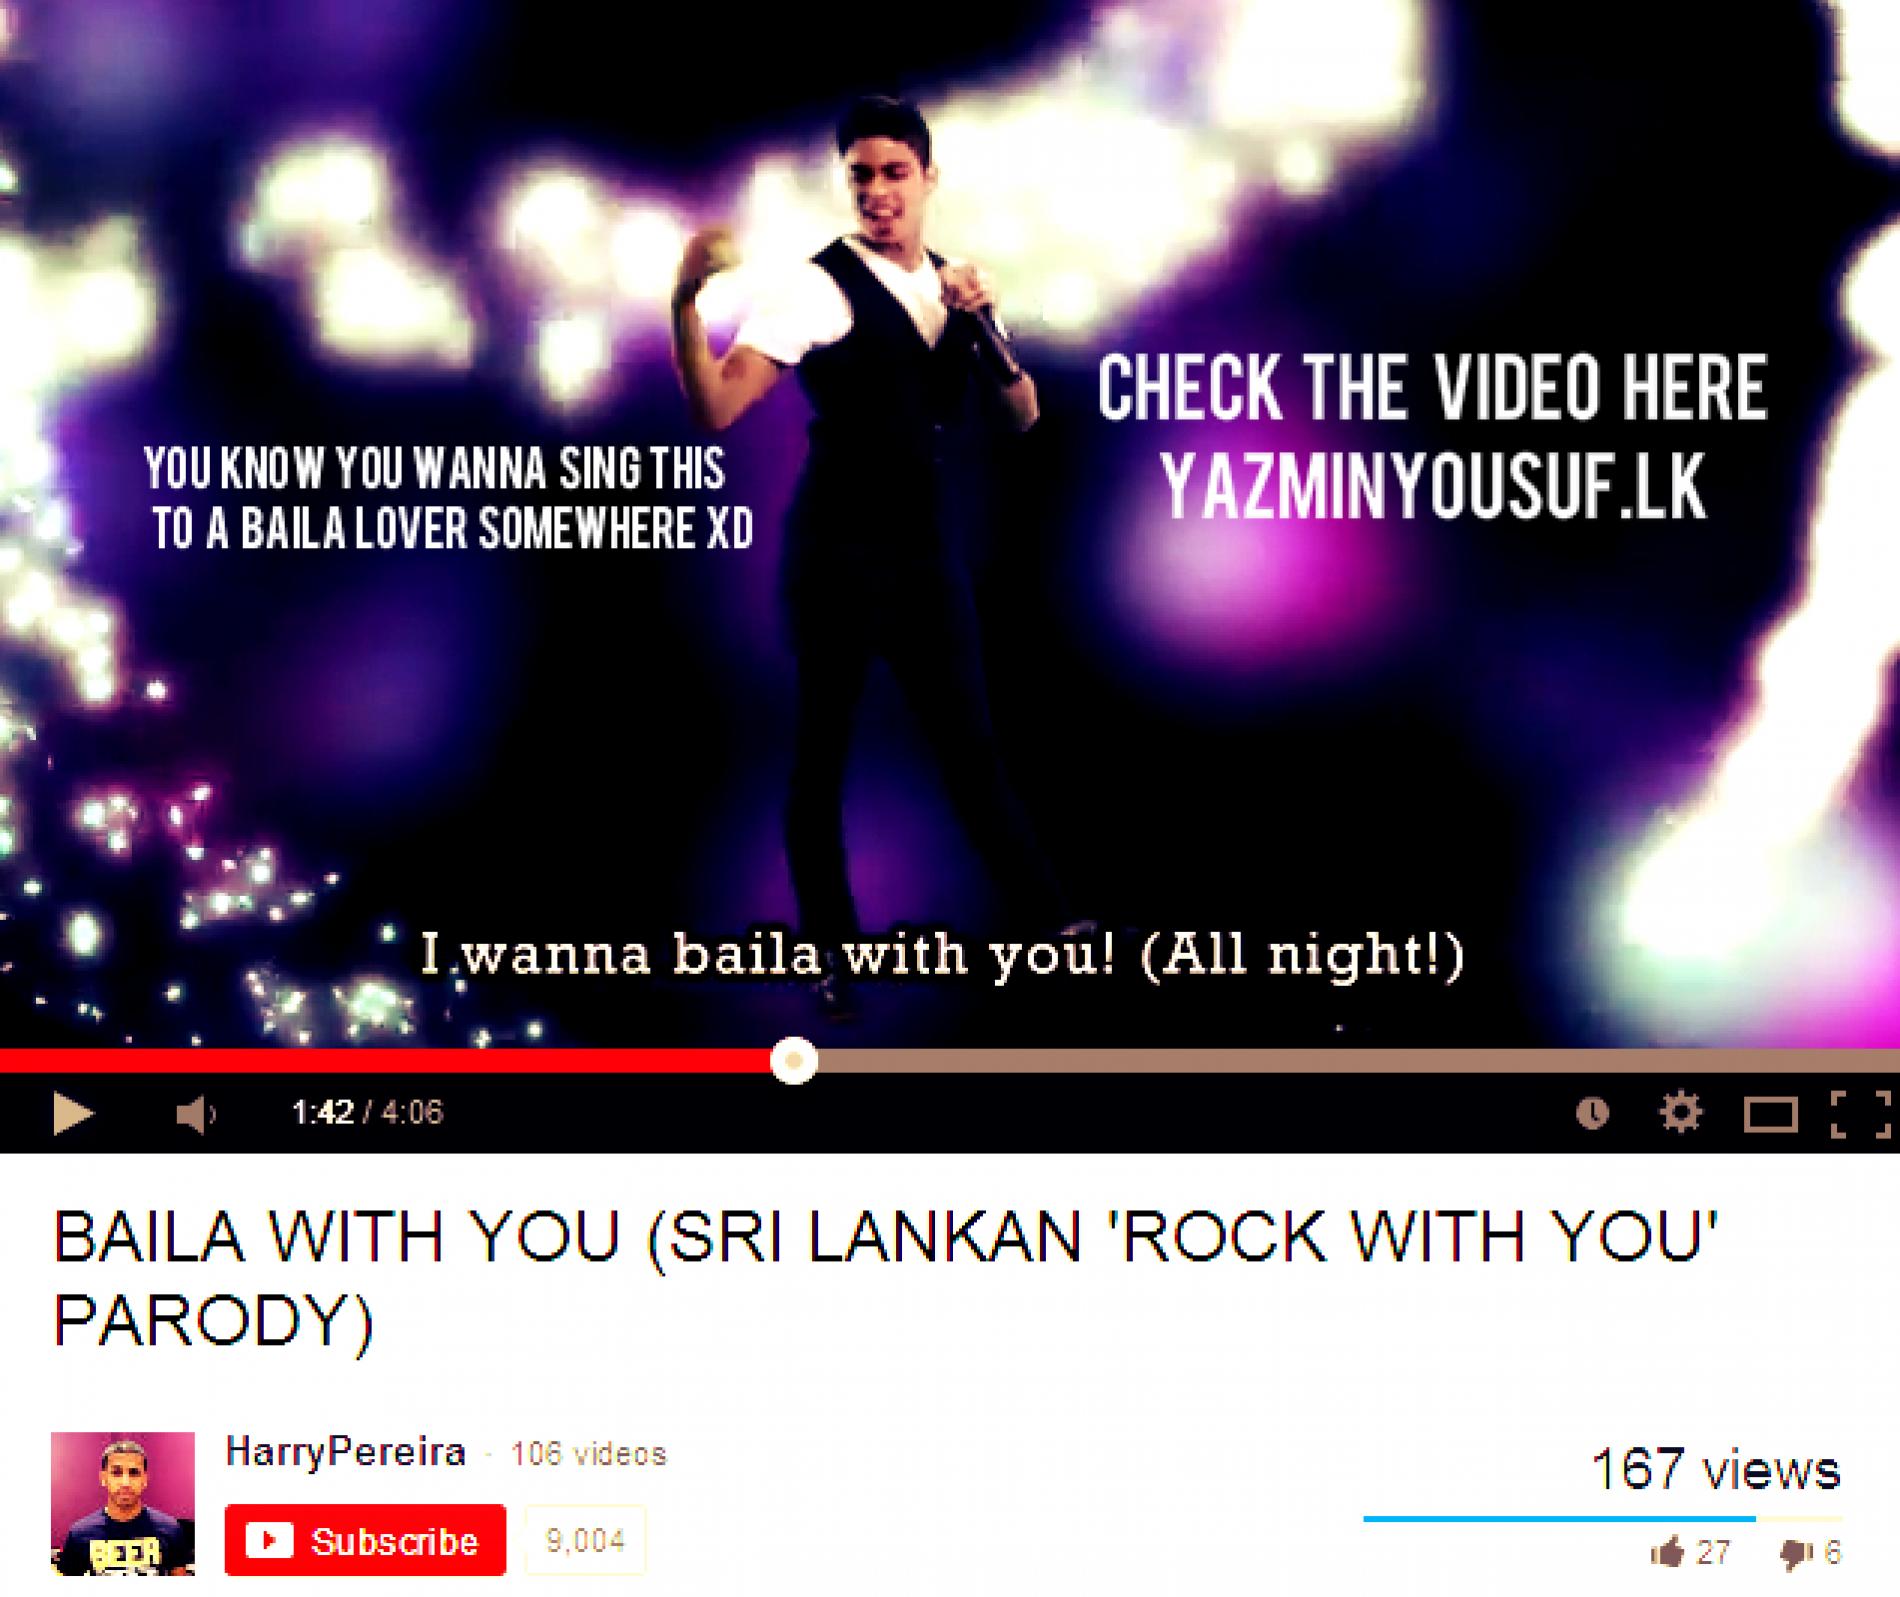 BAILA WITH YOU (SRI LANKAN “ROCK WITH YOU”)